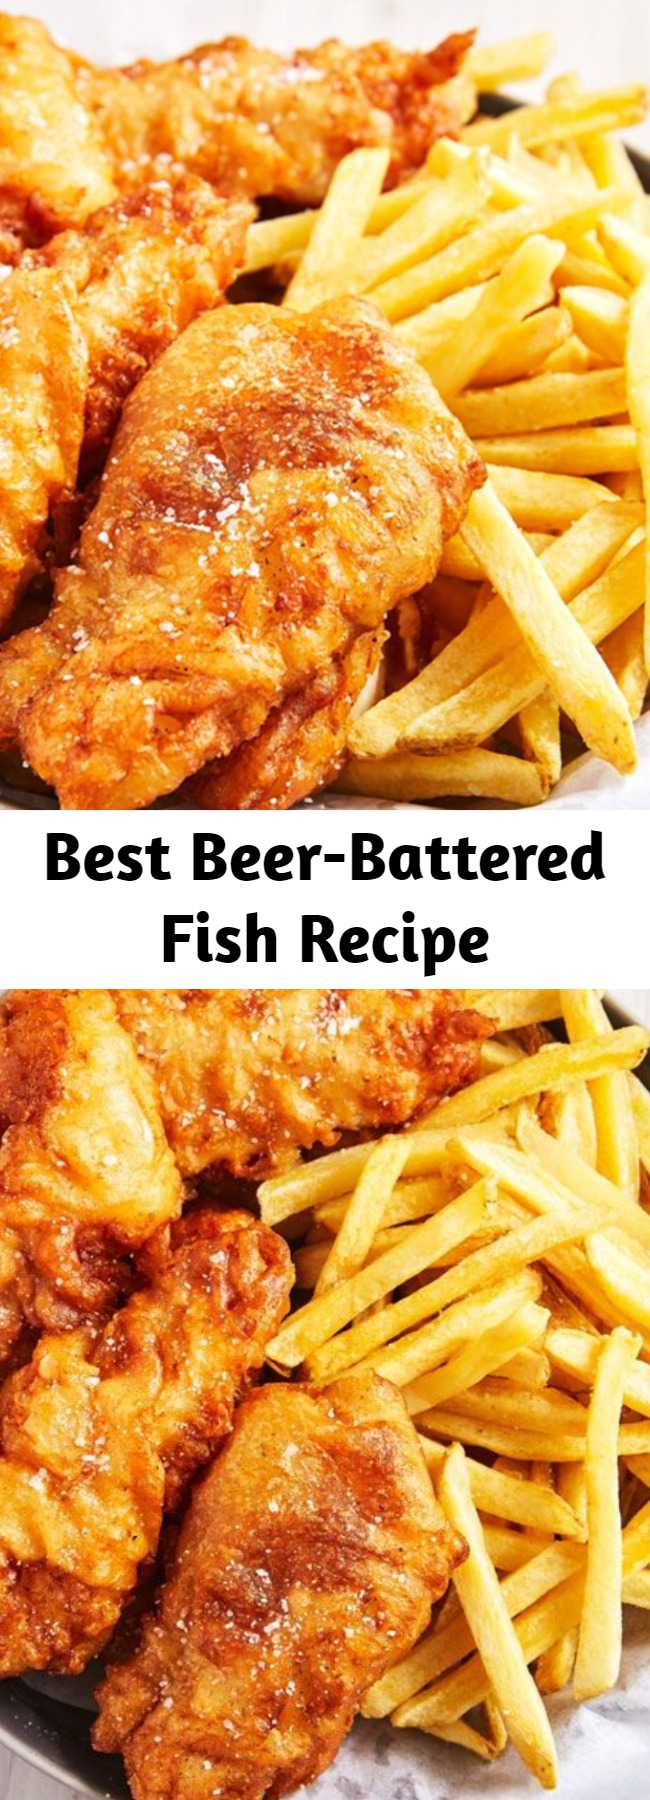 Best Beer-Battered Fish Recipe - There's nothing super crazy about this recipe, but when you do it right, it's absolutely perfect.